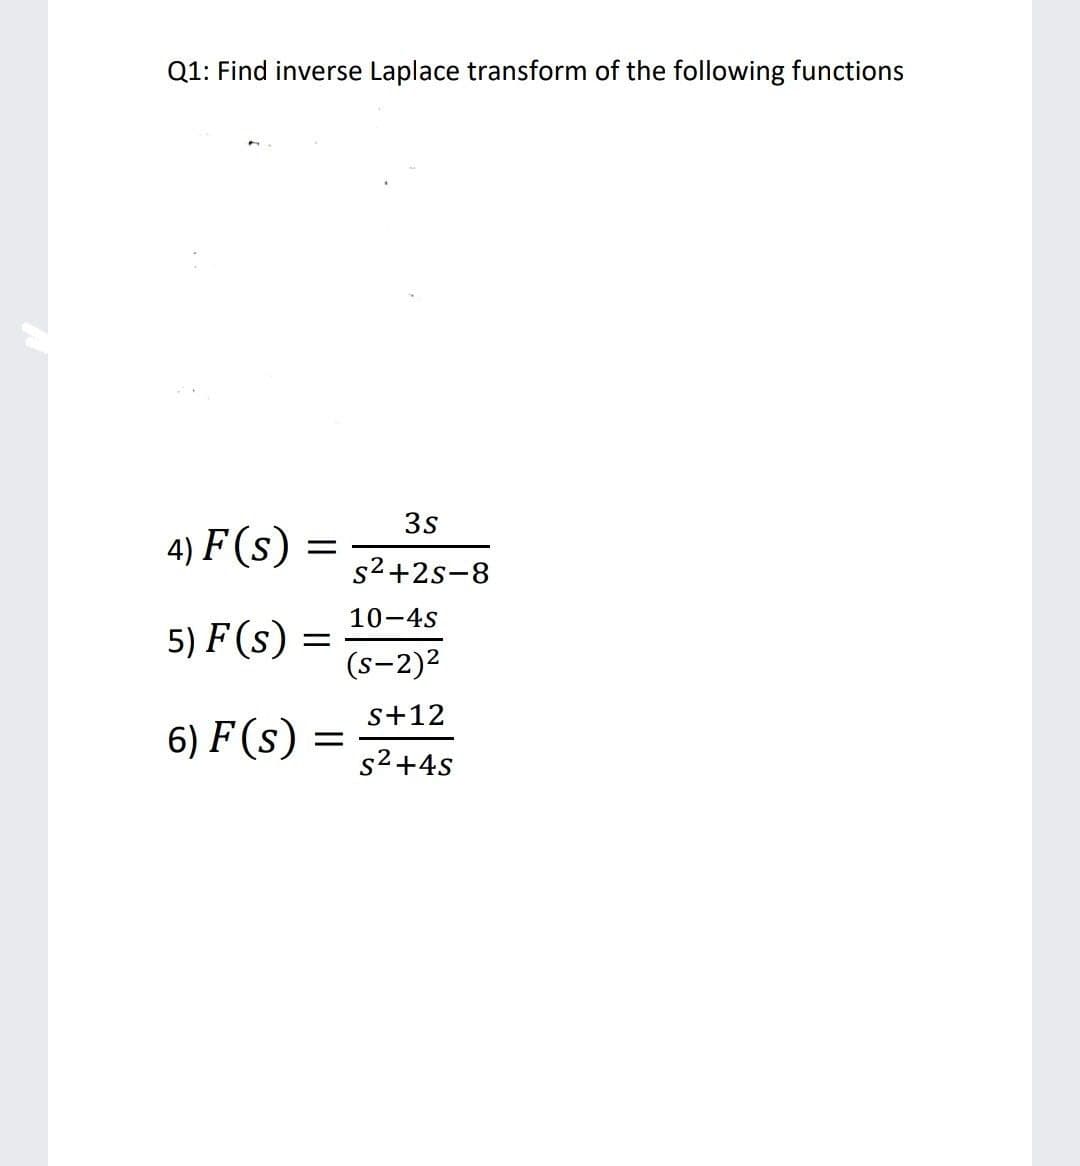 Q1: Find inverse Laplace transform of the following functions
3s
4) F (s)
s2+2s-8
10-4s
5) F (s)
(s-2)2
s+12
6) F (s)
s2+4s
